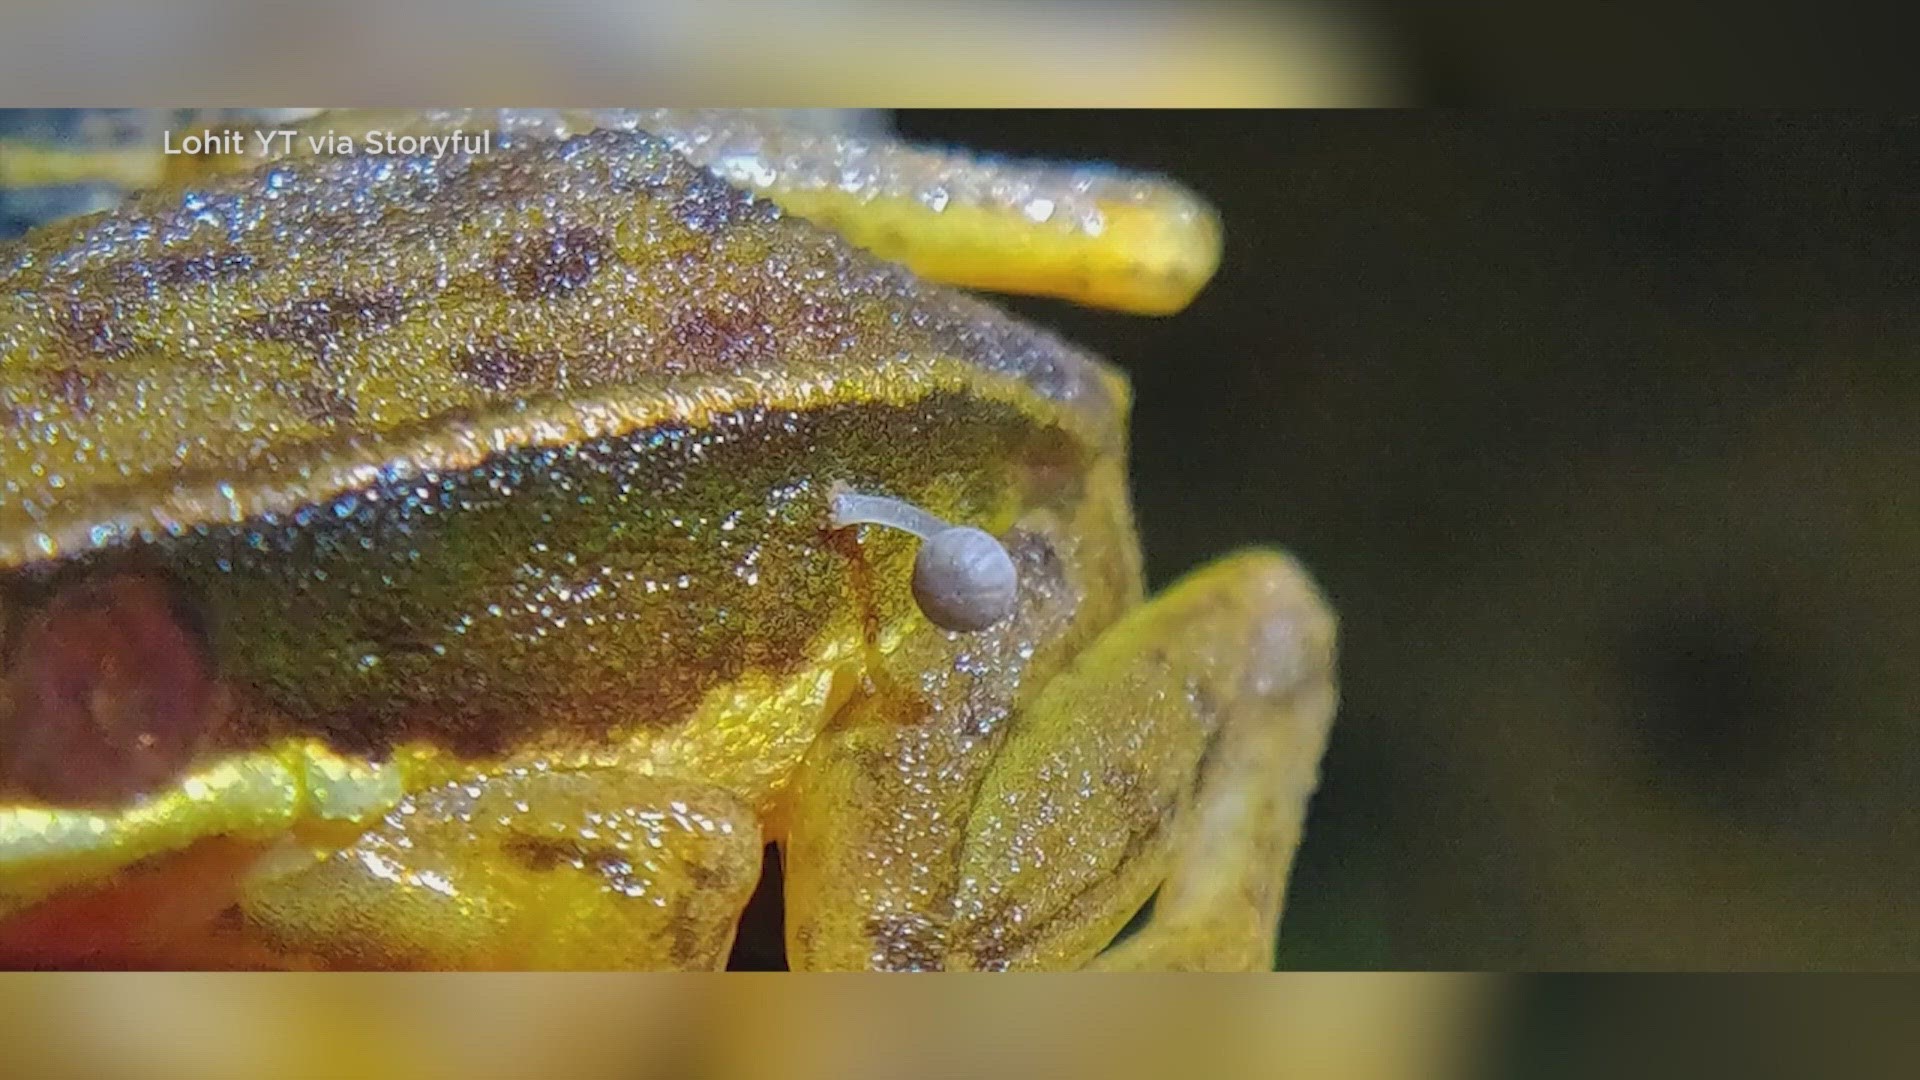 According to the report, a mushroom sprouting from a live frog has never been documented.